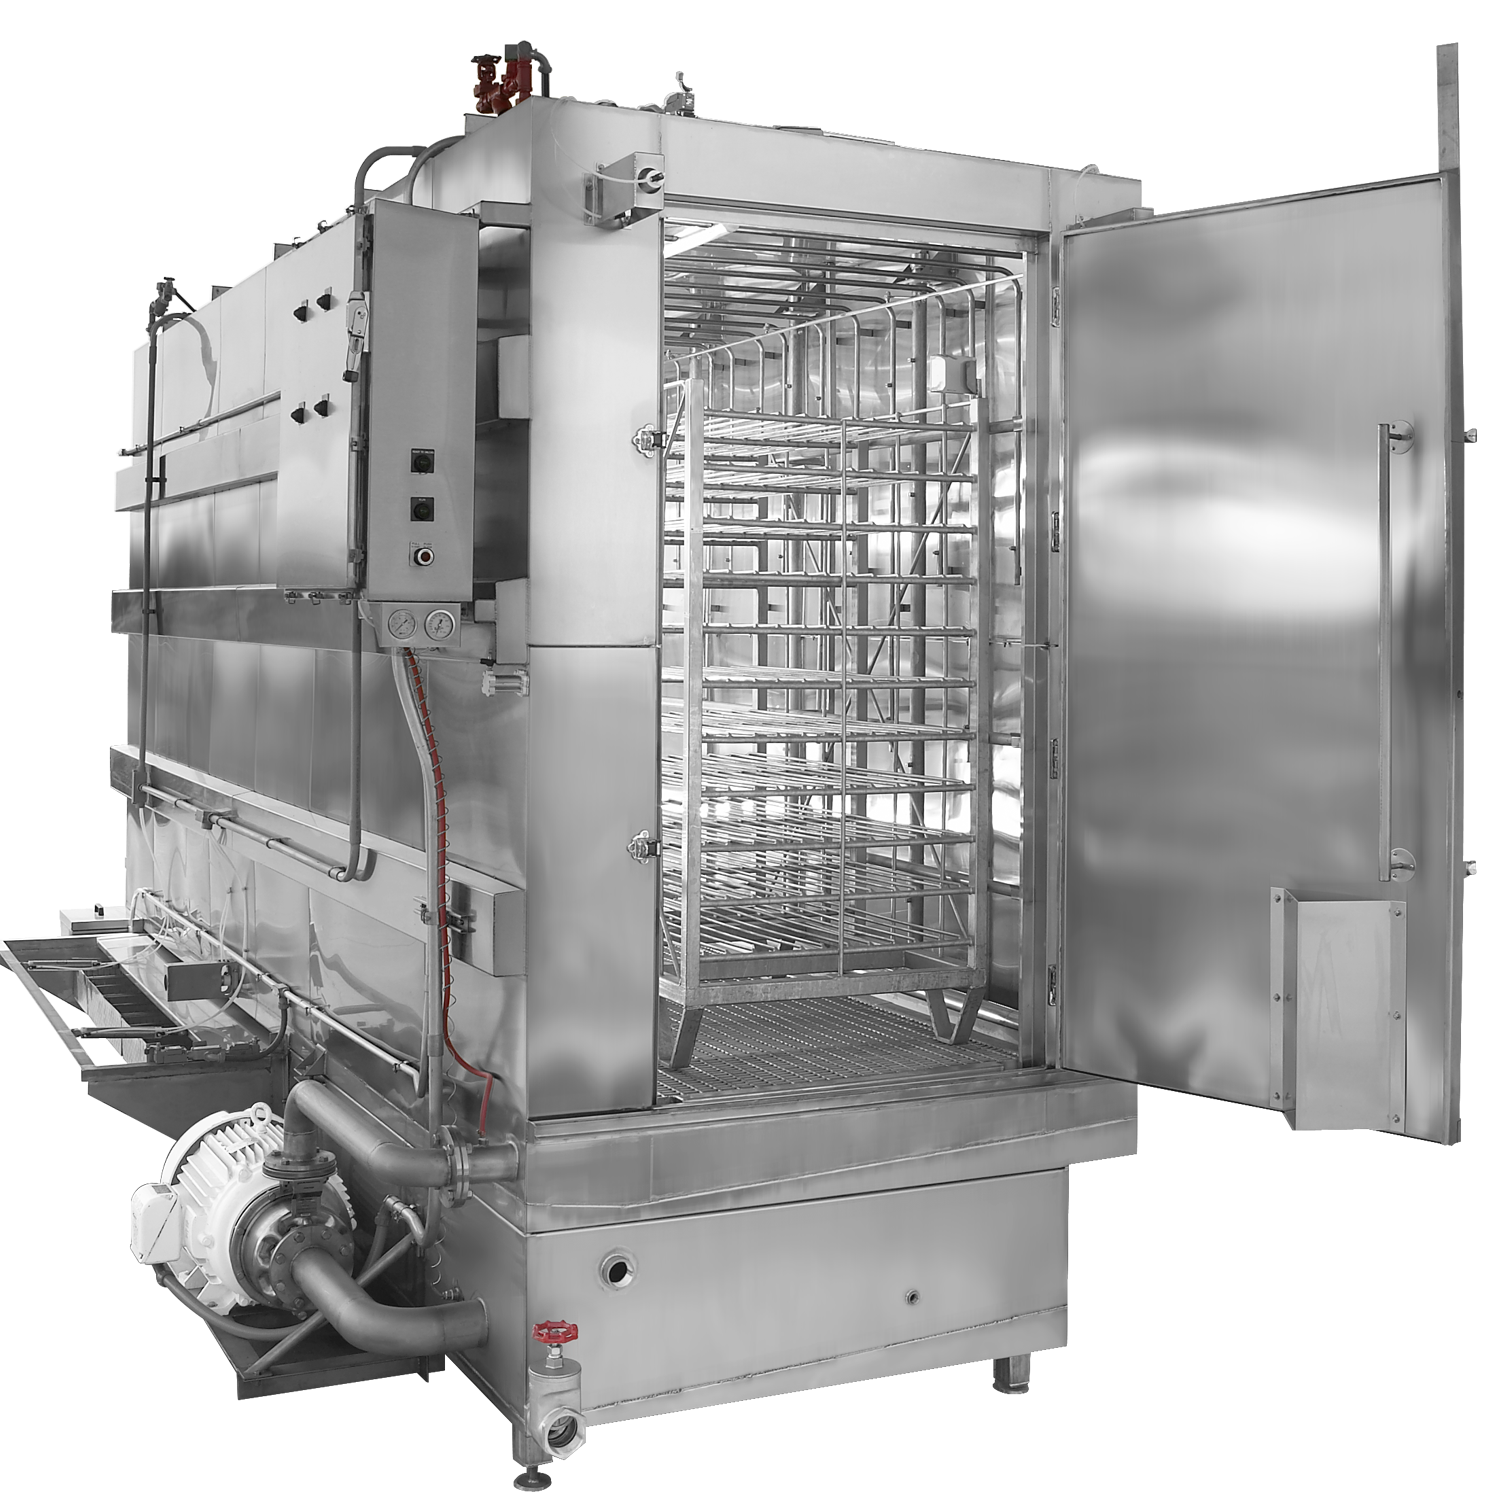 STW-with-Smoke-Rack Model Commercial Dishwasher Manufacturer Brand Partner Douglas Washing and Sanitizing Systems Safer Cleaner Faster Industrial Dishwasher Restaurant Dishwasher Food Industry Cleaning Machines